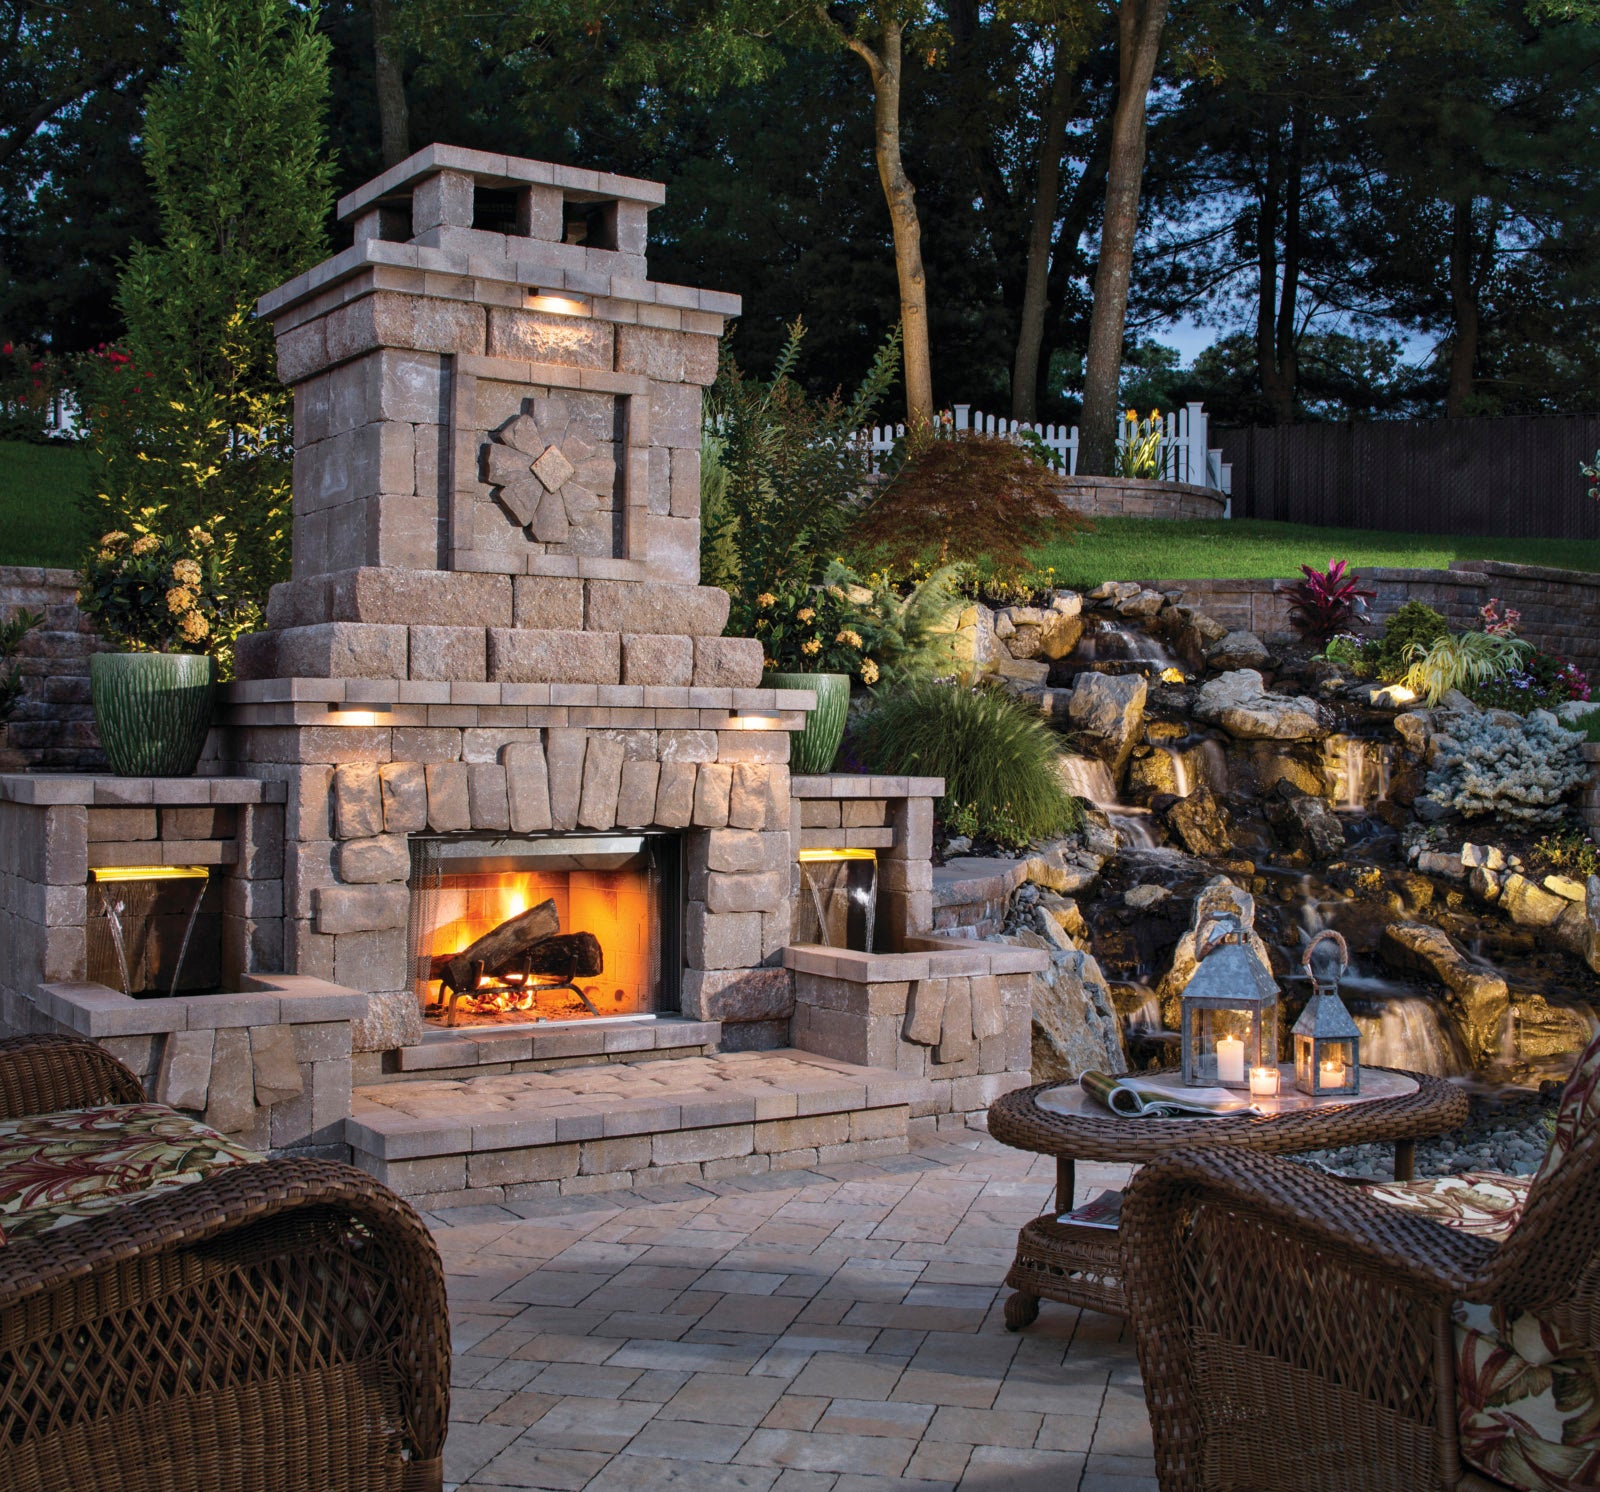 Belgard Elements™ Fireplace and Water Element